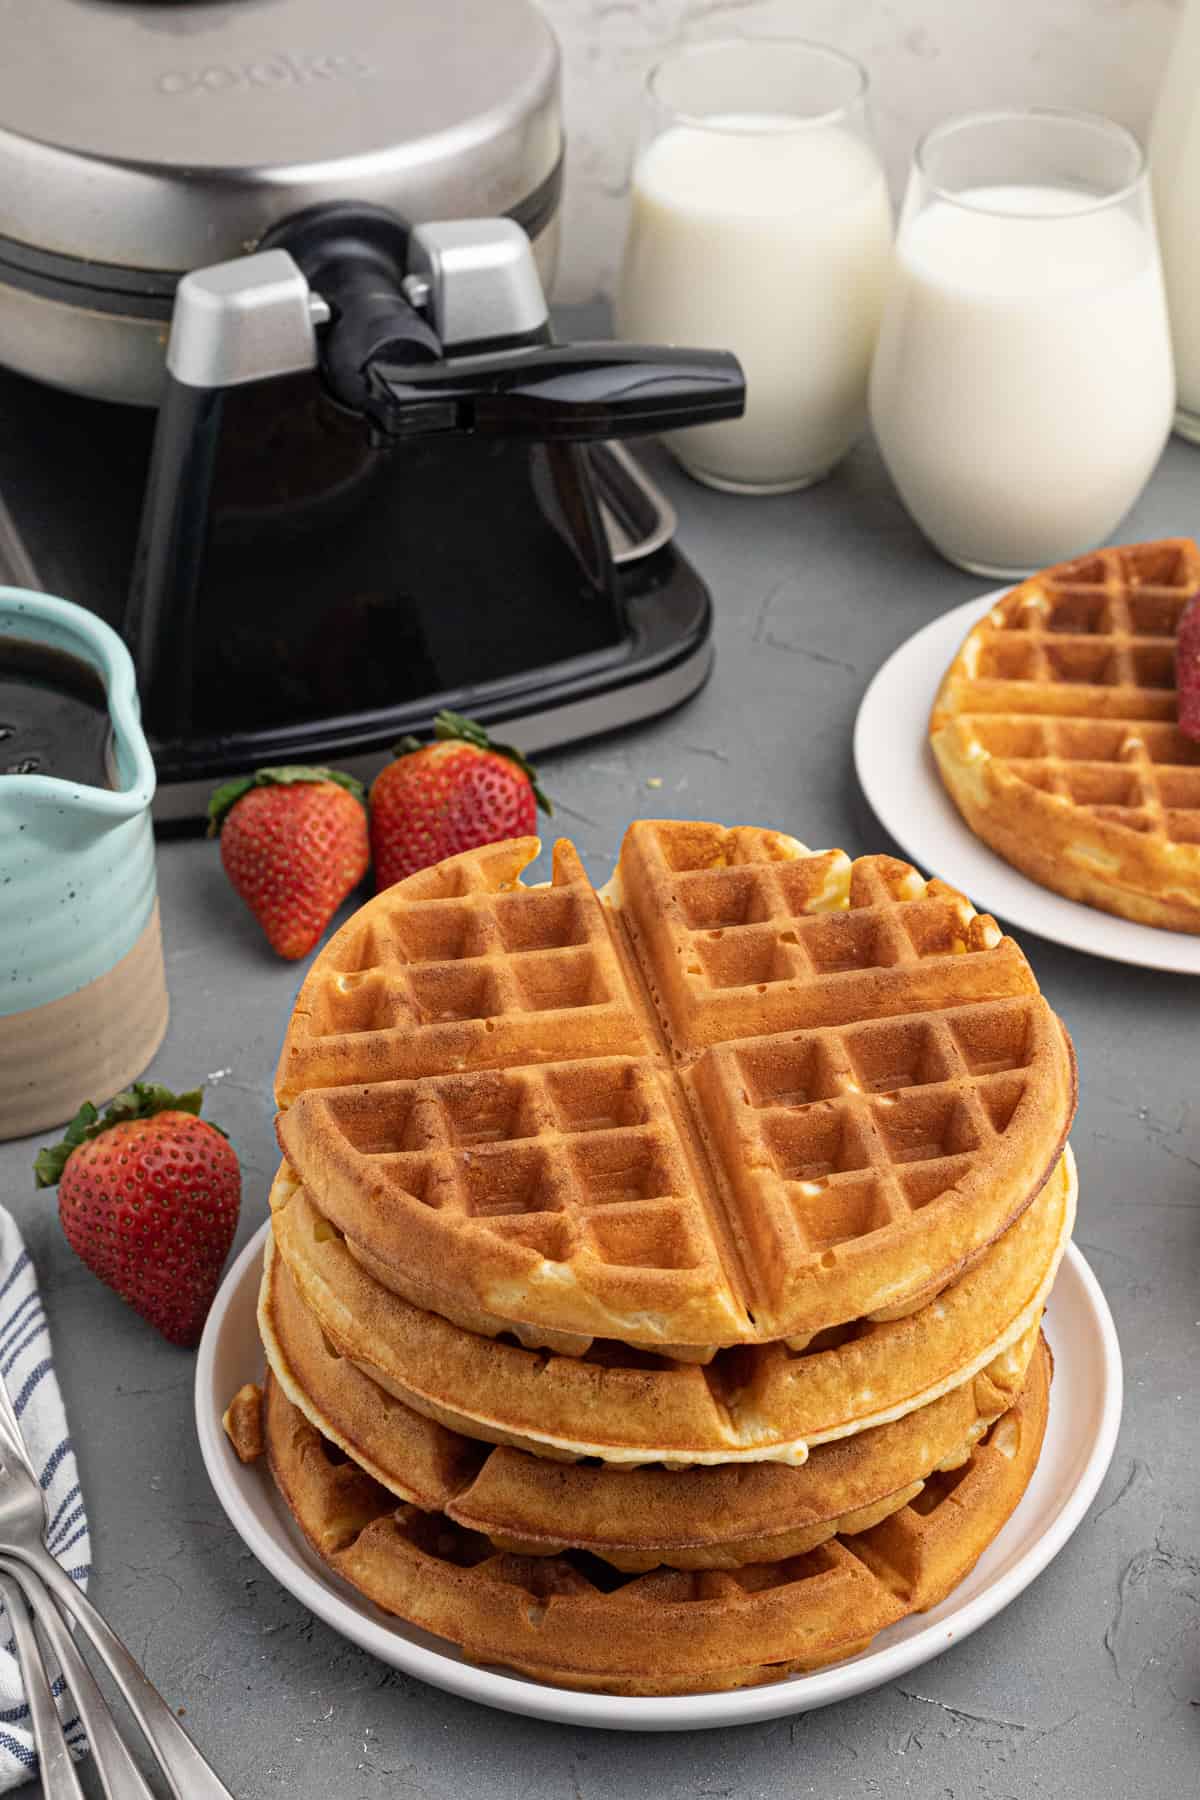 a stack of waffles next to a waffle maker, with glasses of milk in the background